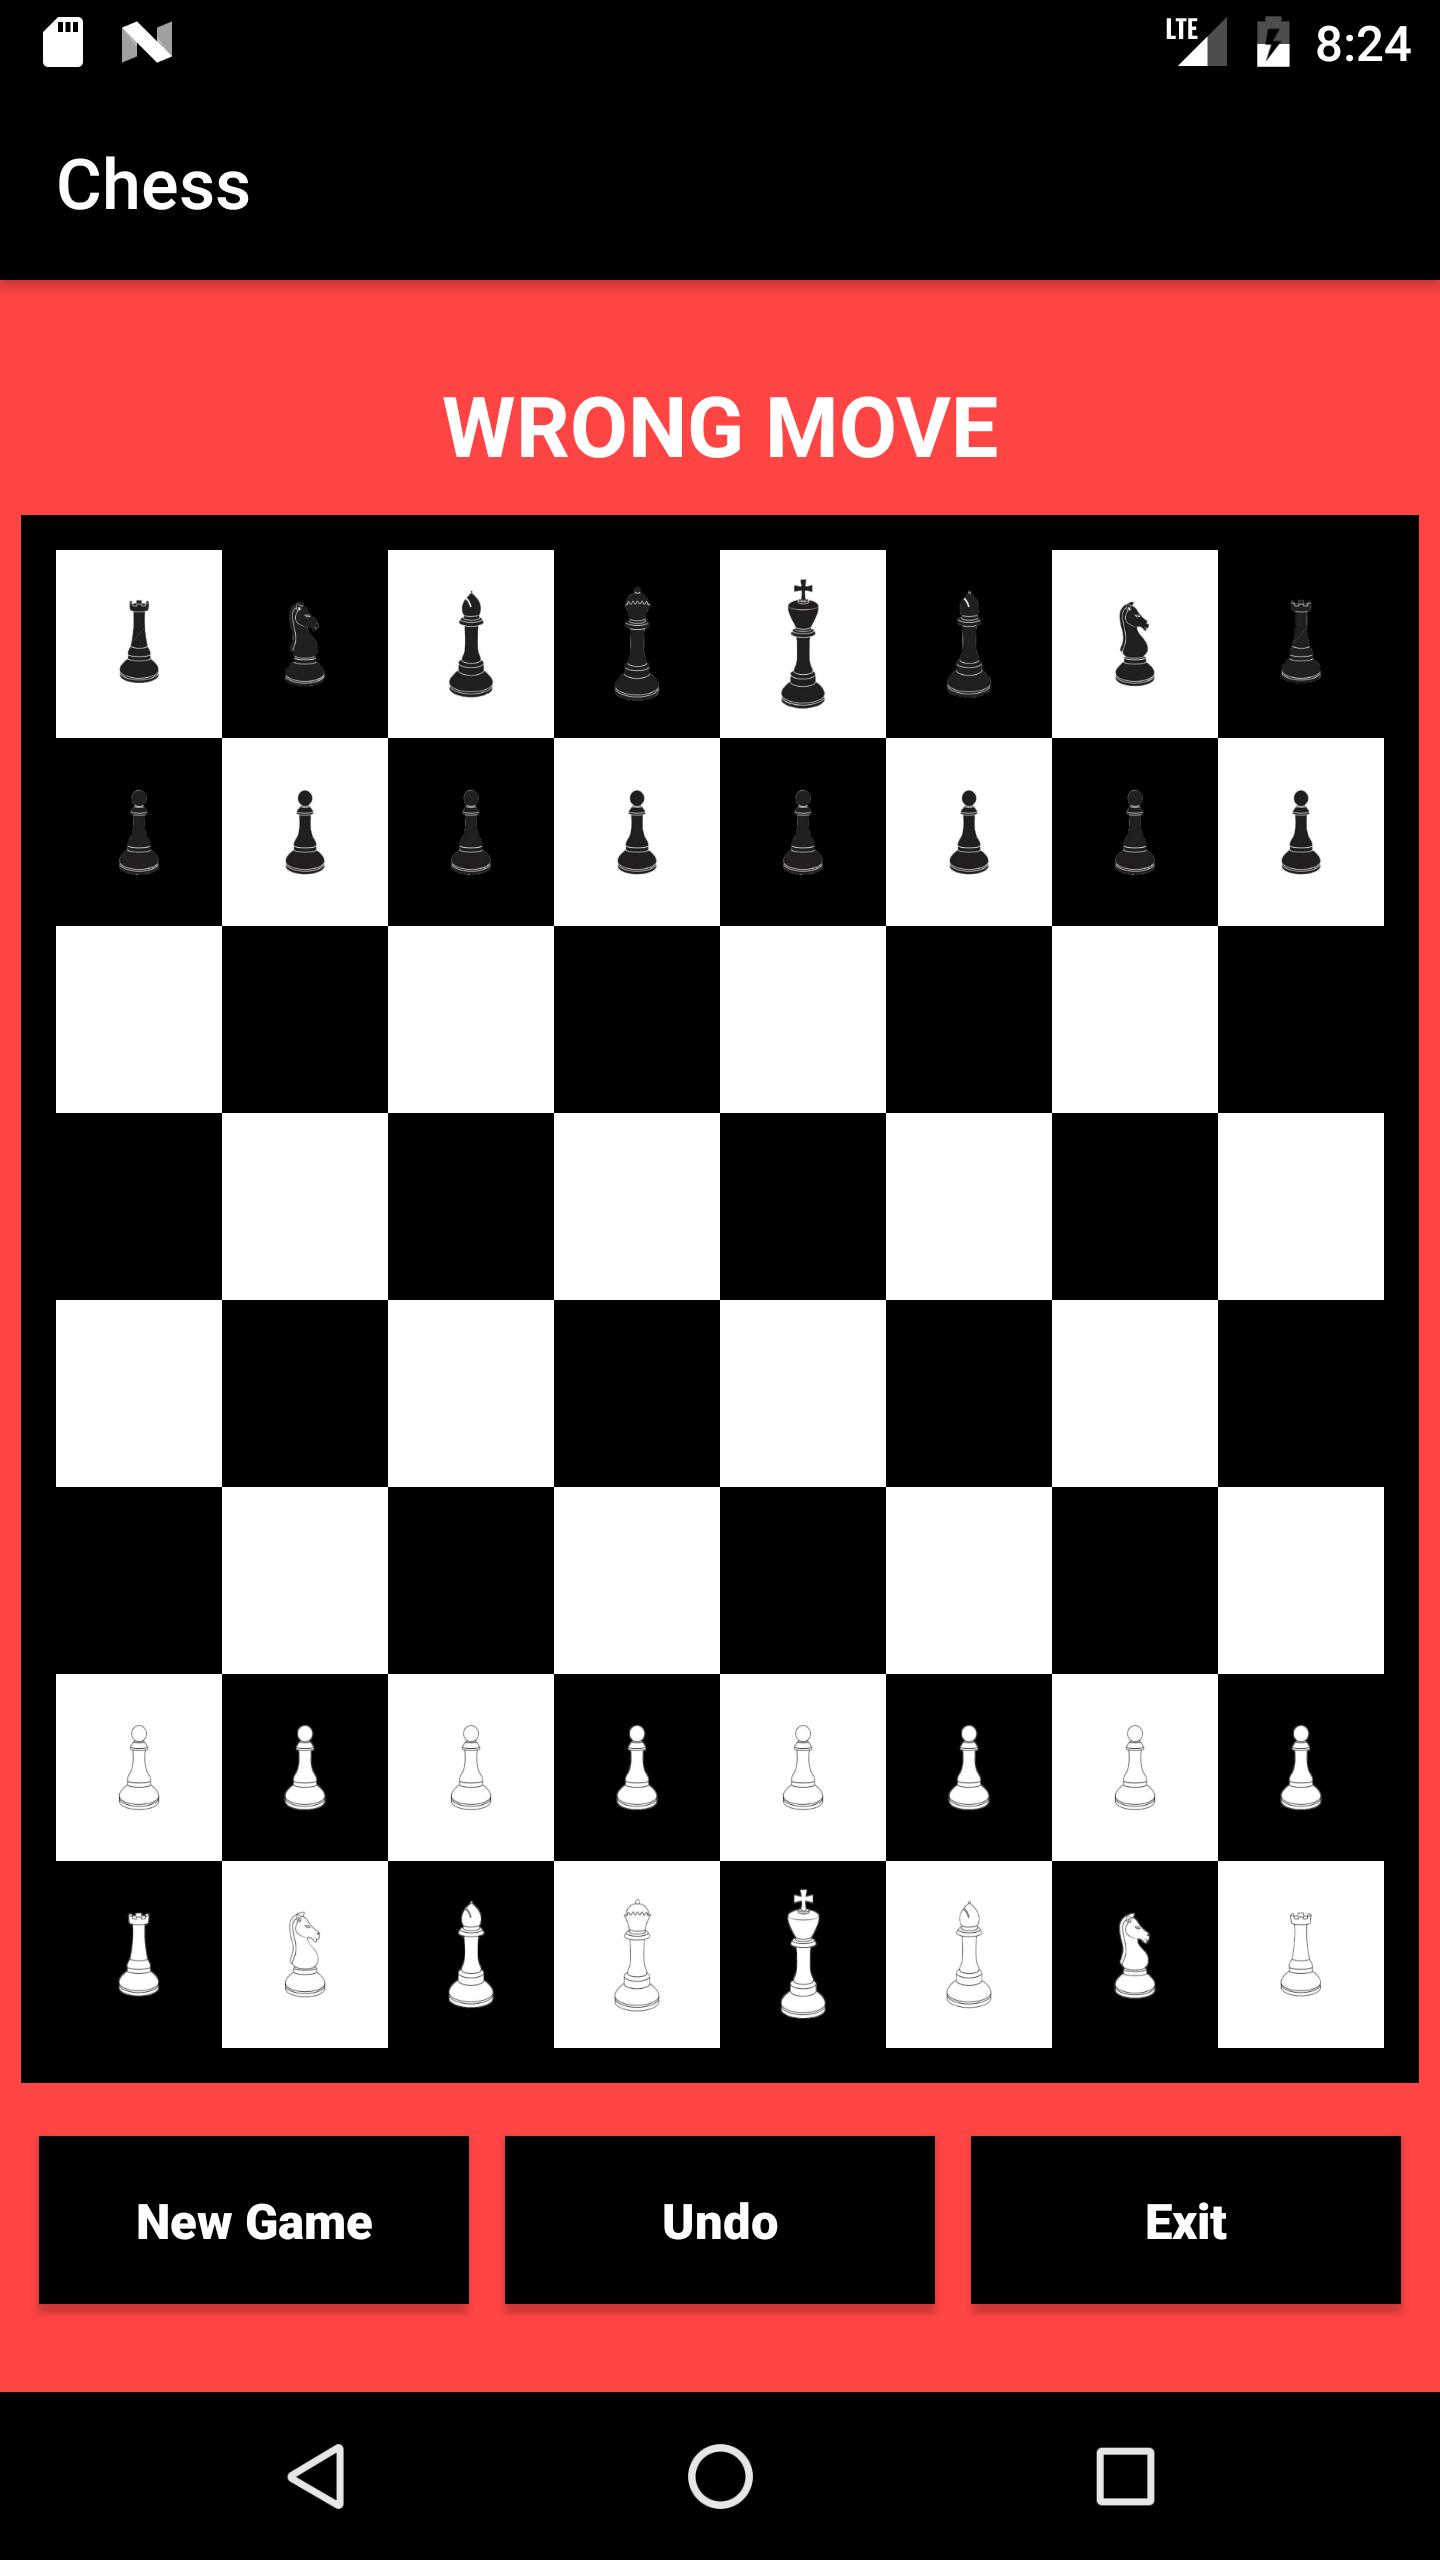 Шахматы том 1. Schelling Arms and influence. Chess 1.2.4 APKCOMBO. Arms and influence Thomas Cover book. Arms and influence Cover book.